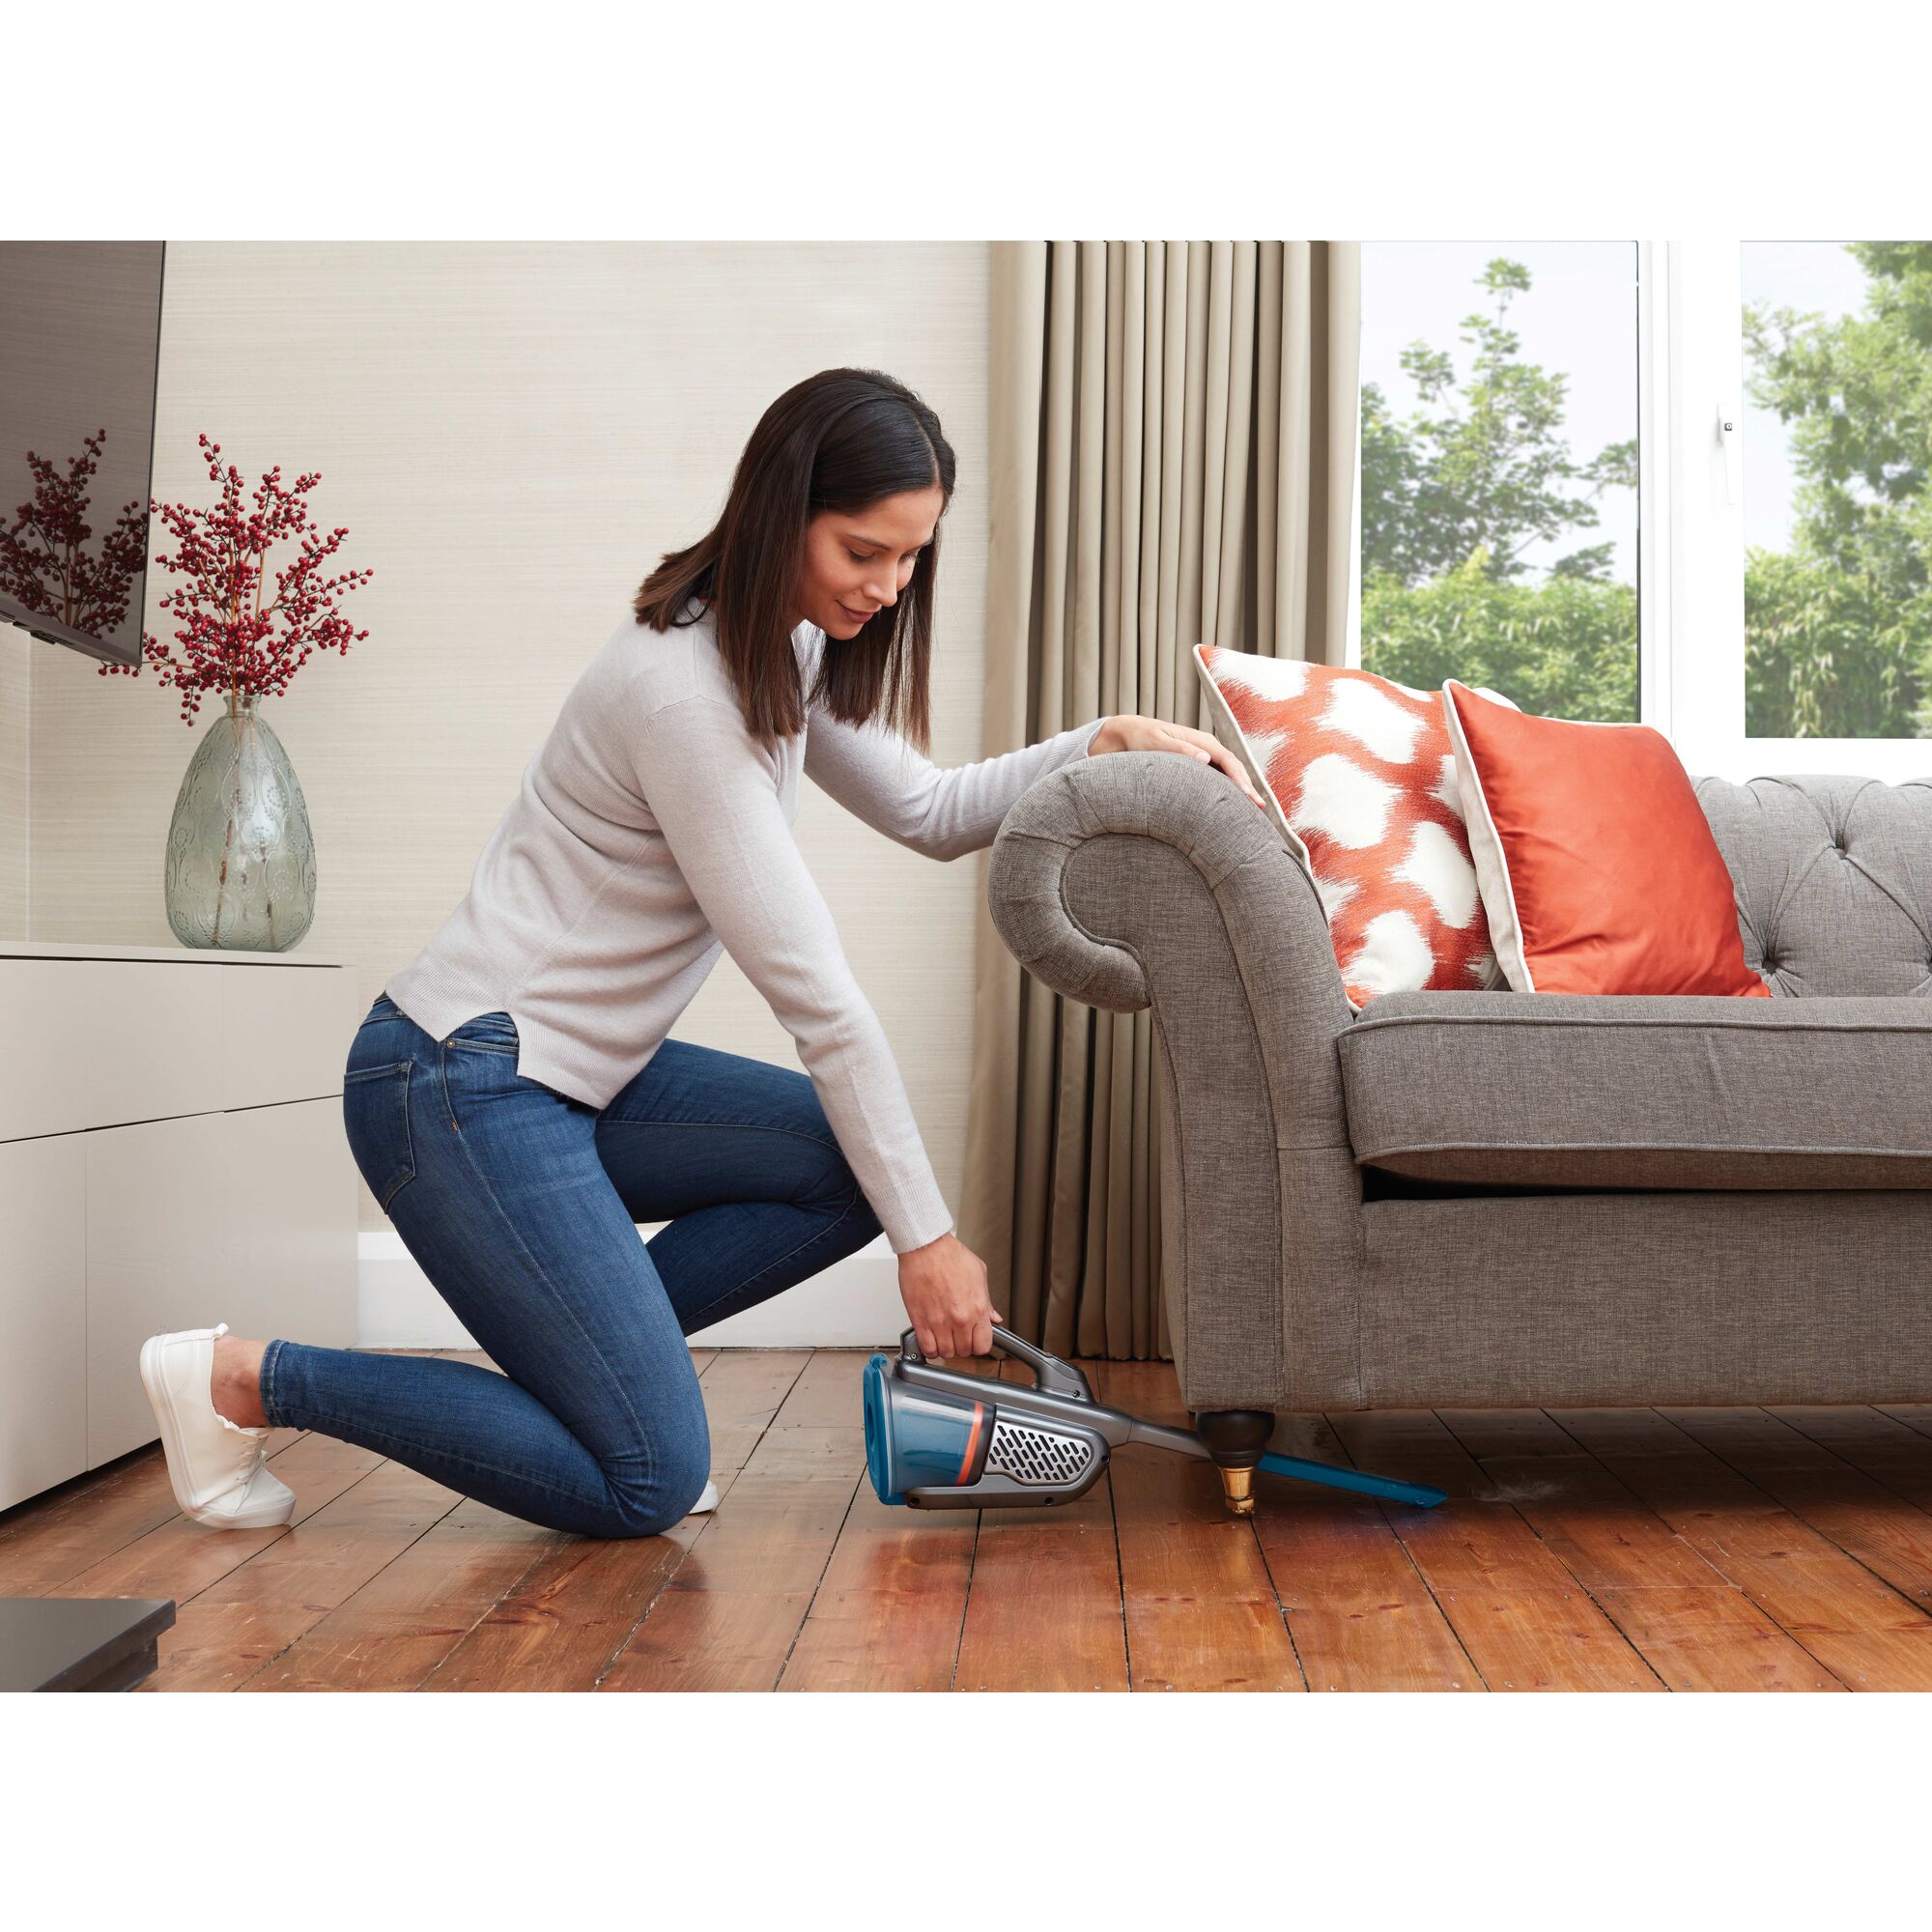 12 volt dustbuster advanced clean cordless hand vacuum being used under sofa.